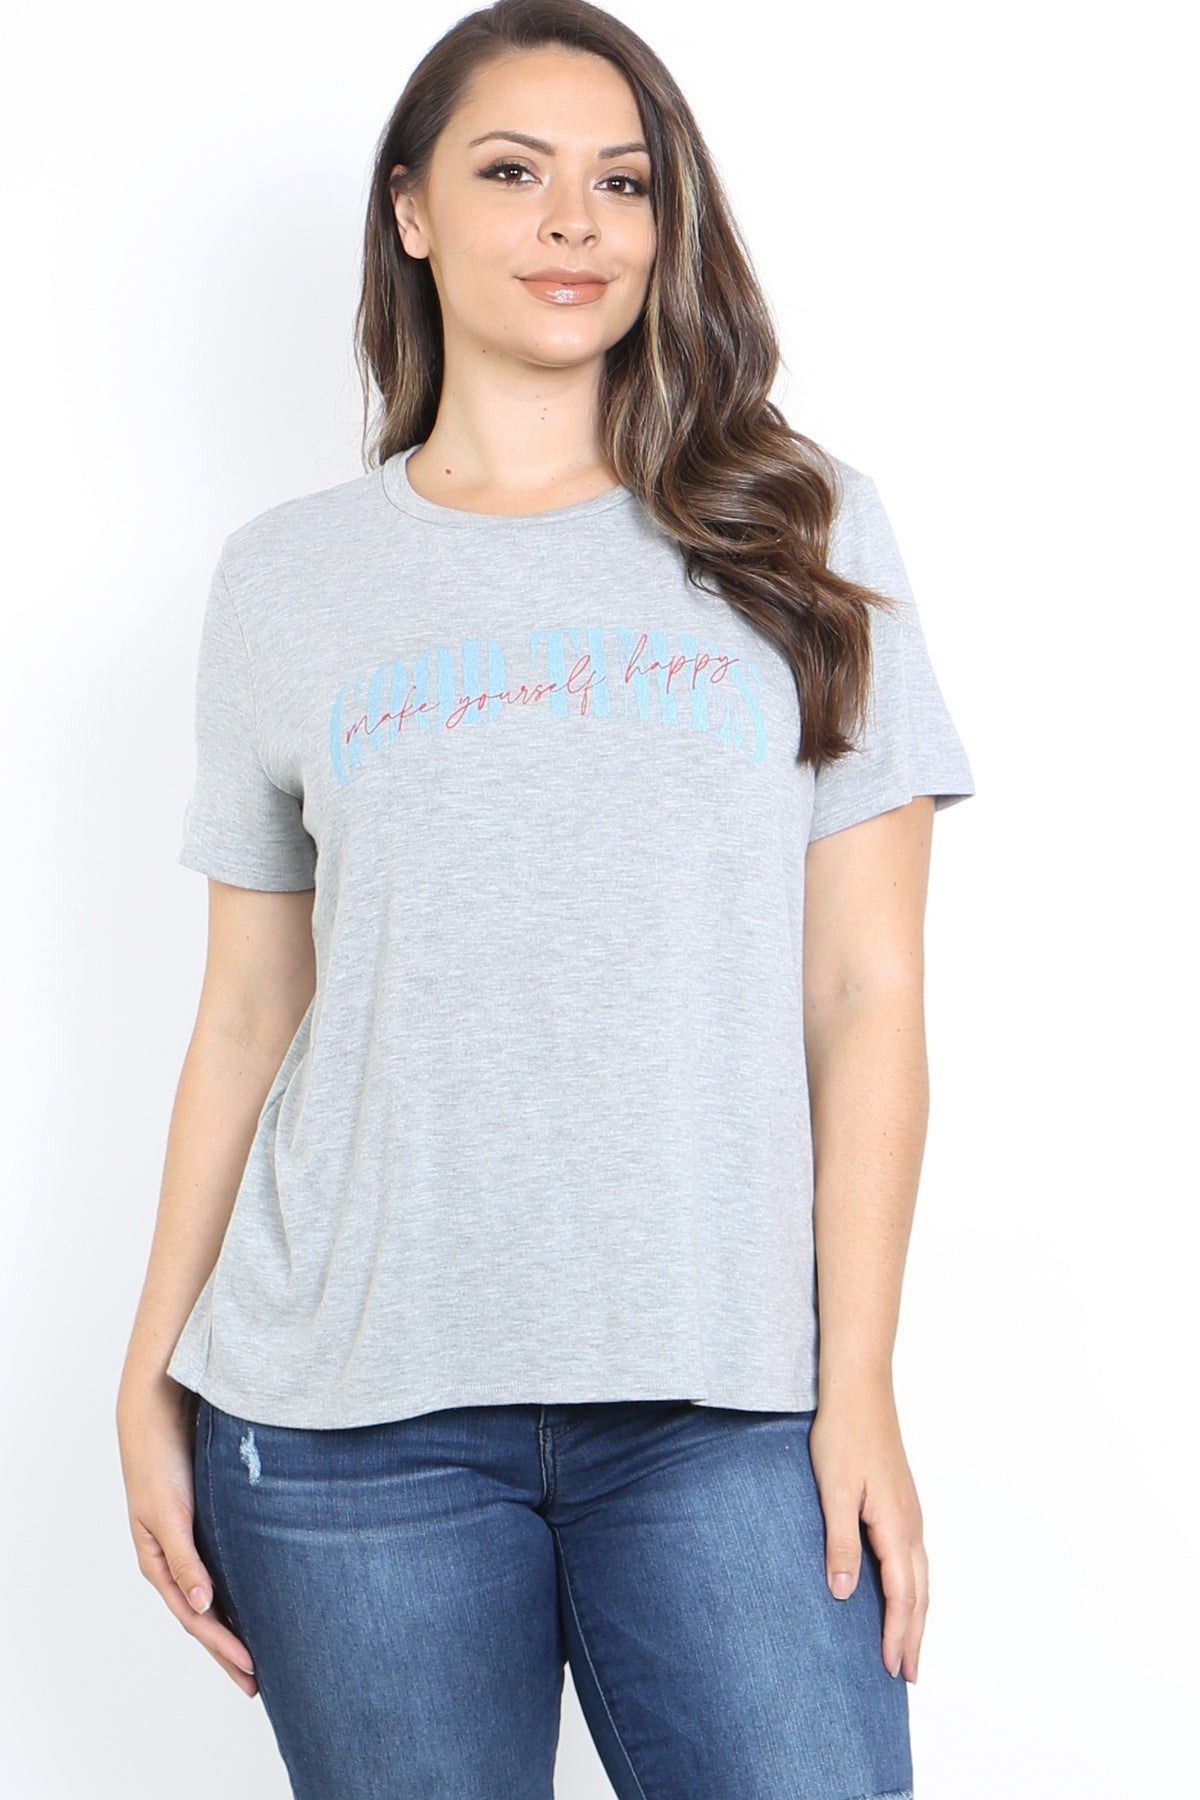 HEATHER GRAY "GOOD TIMES MAKES YOURSELF HAPPY" PRINT ROUND NECKLINE PLUS SIZE TOP